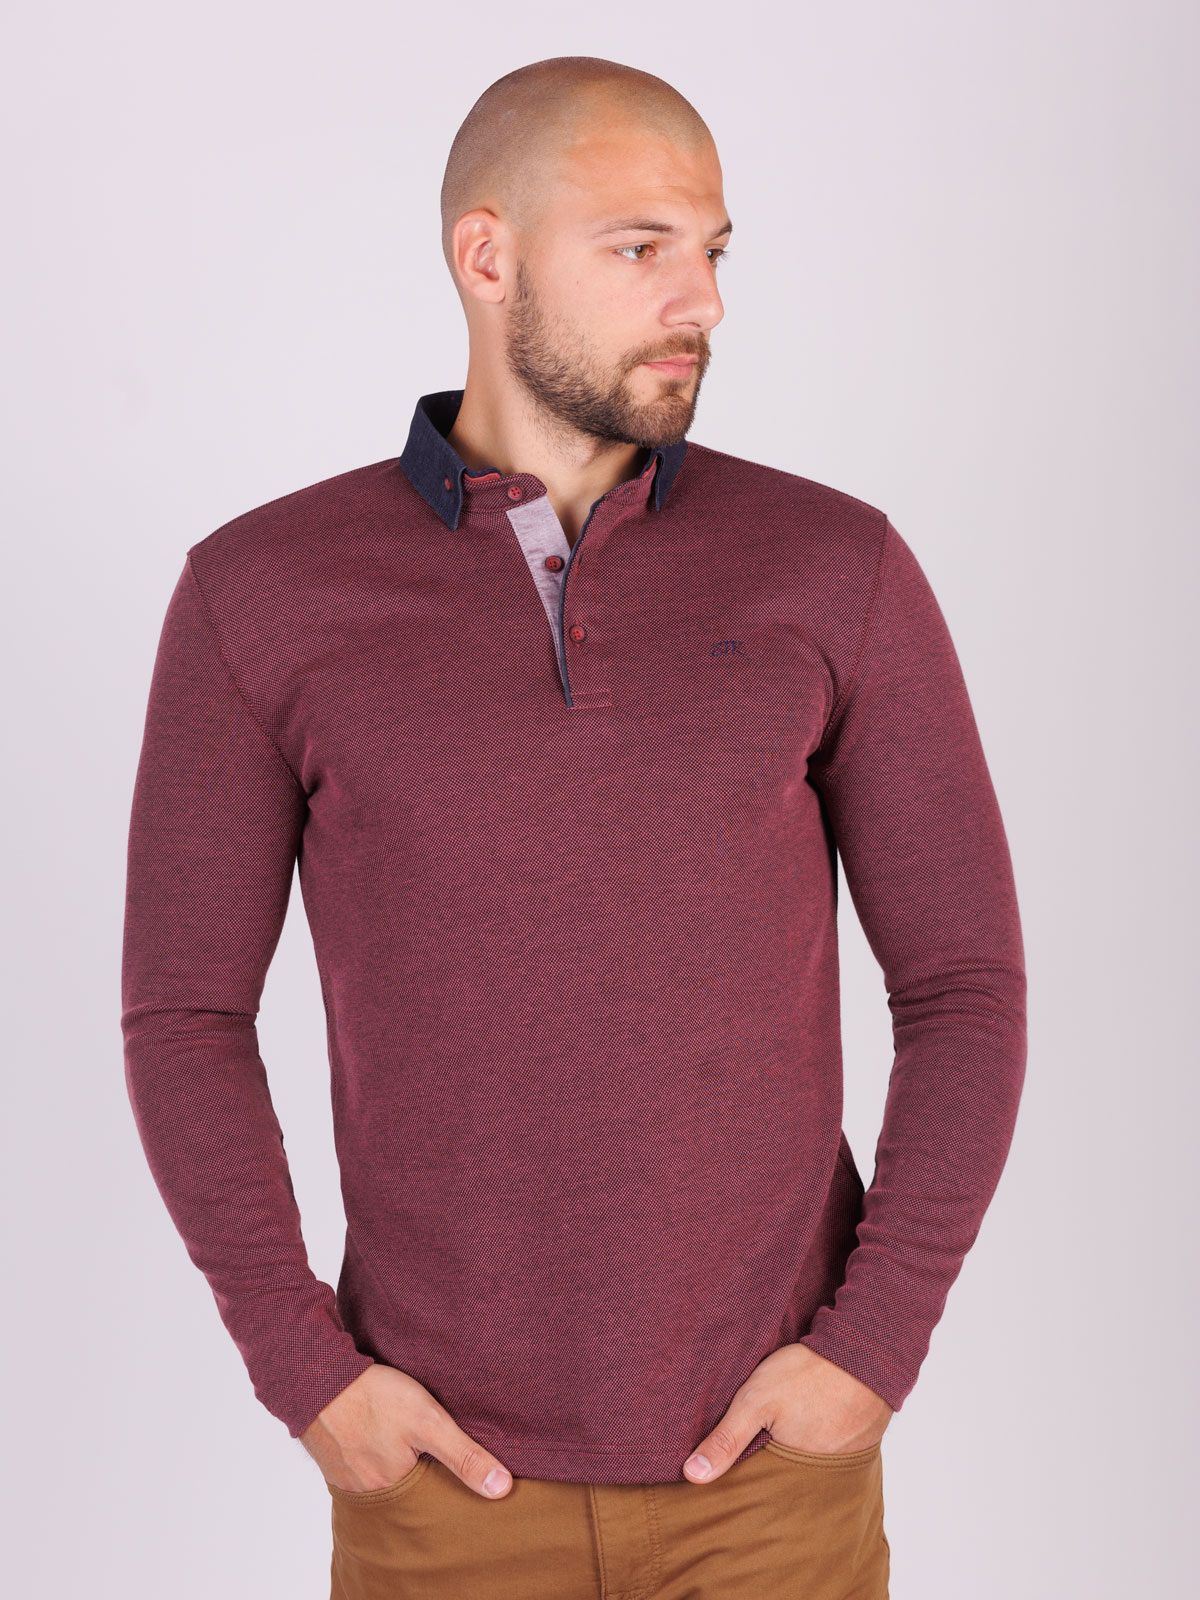 Mens blouse in raspberry color - 18273 € 35.43 img4